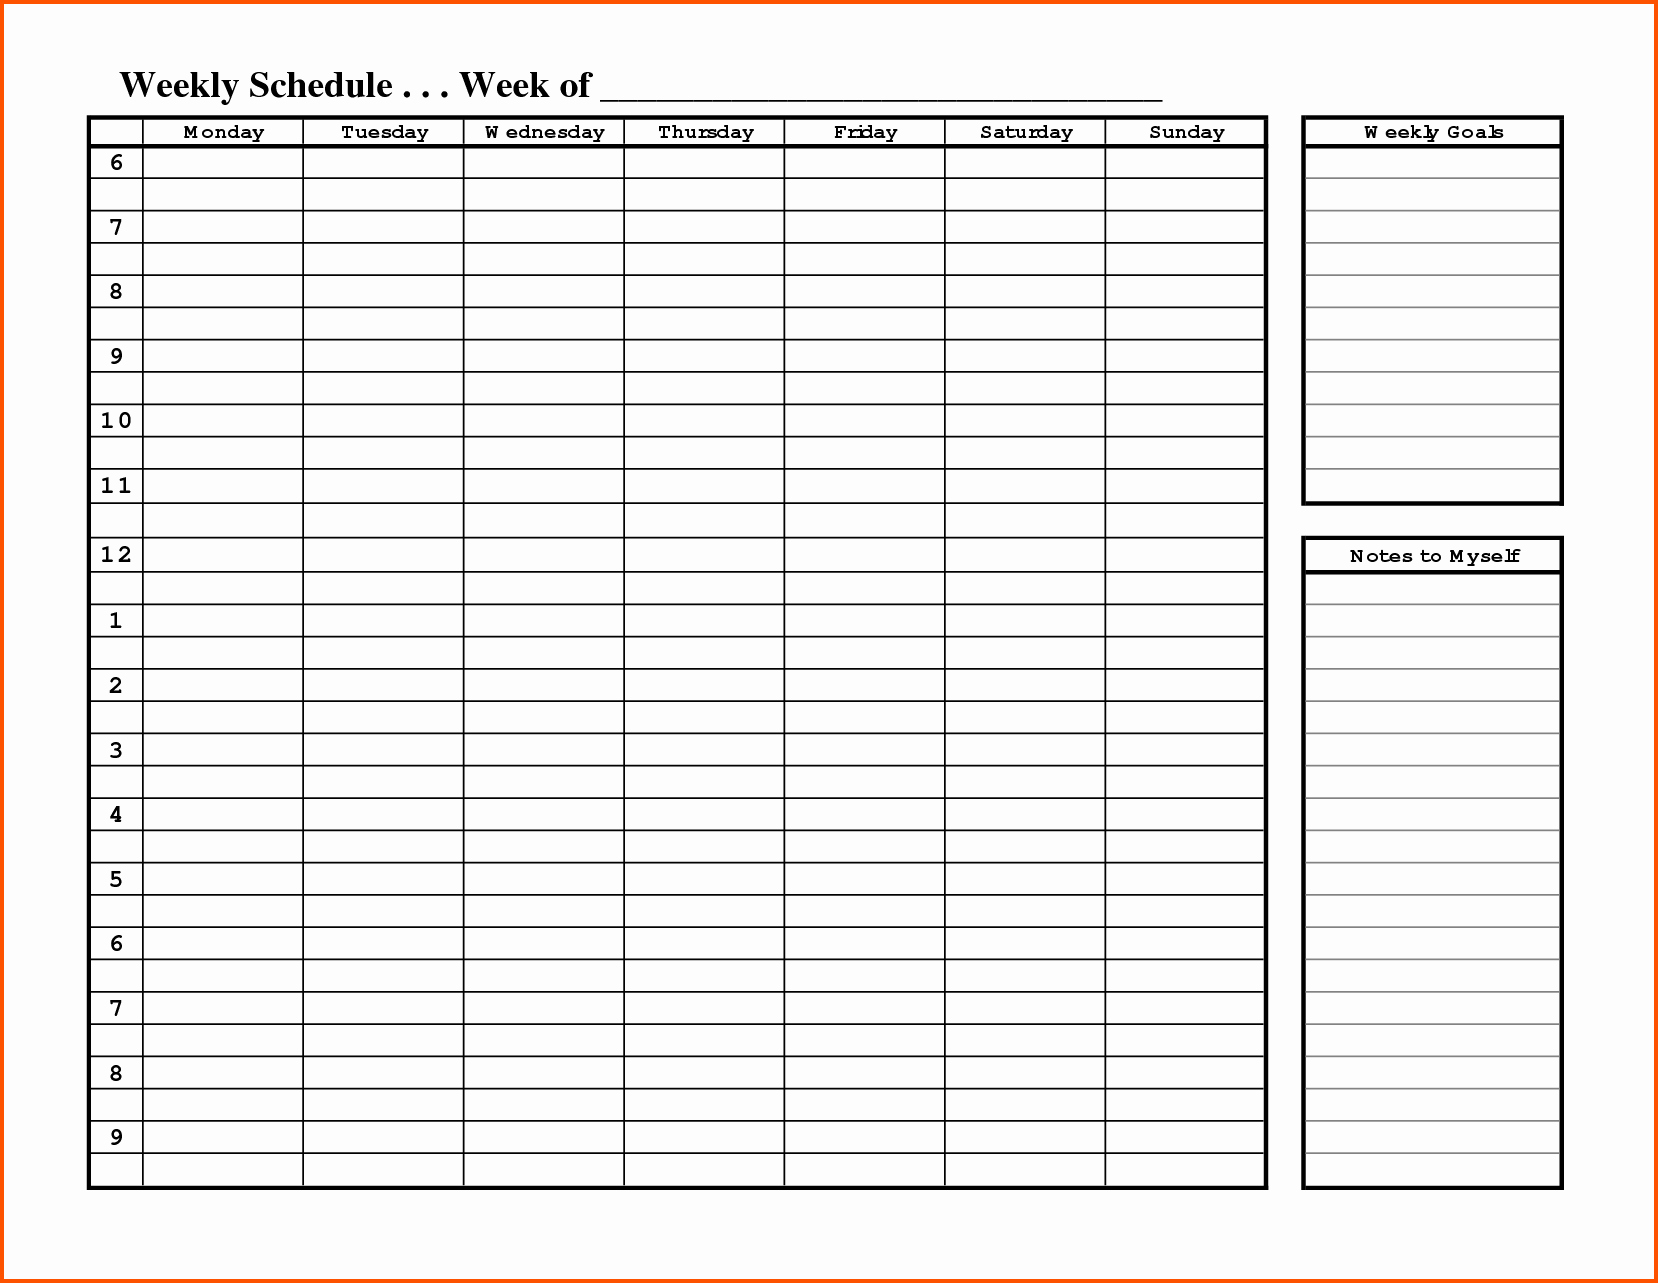 Employee Schedule Template Free New Weekly Schedule Template for Your Inspirations Vatansun